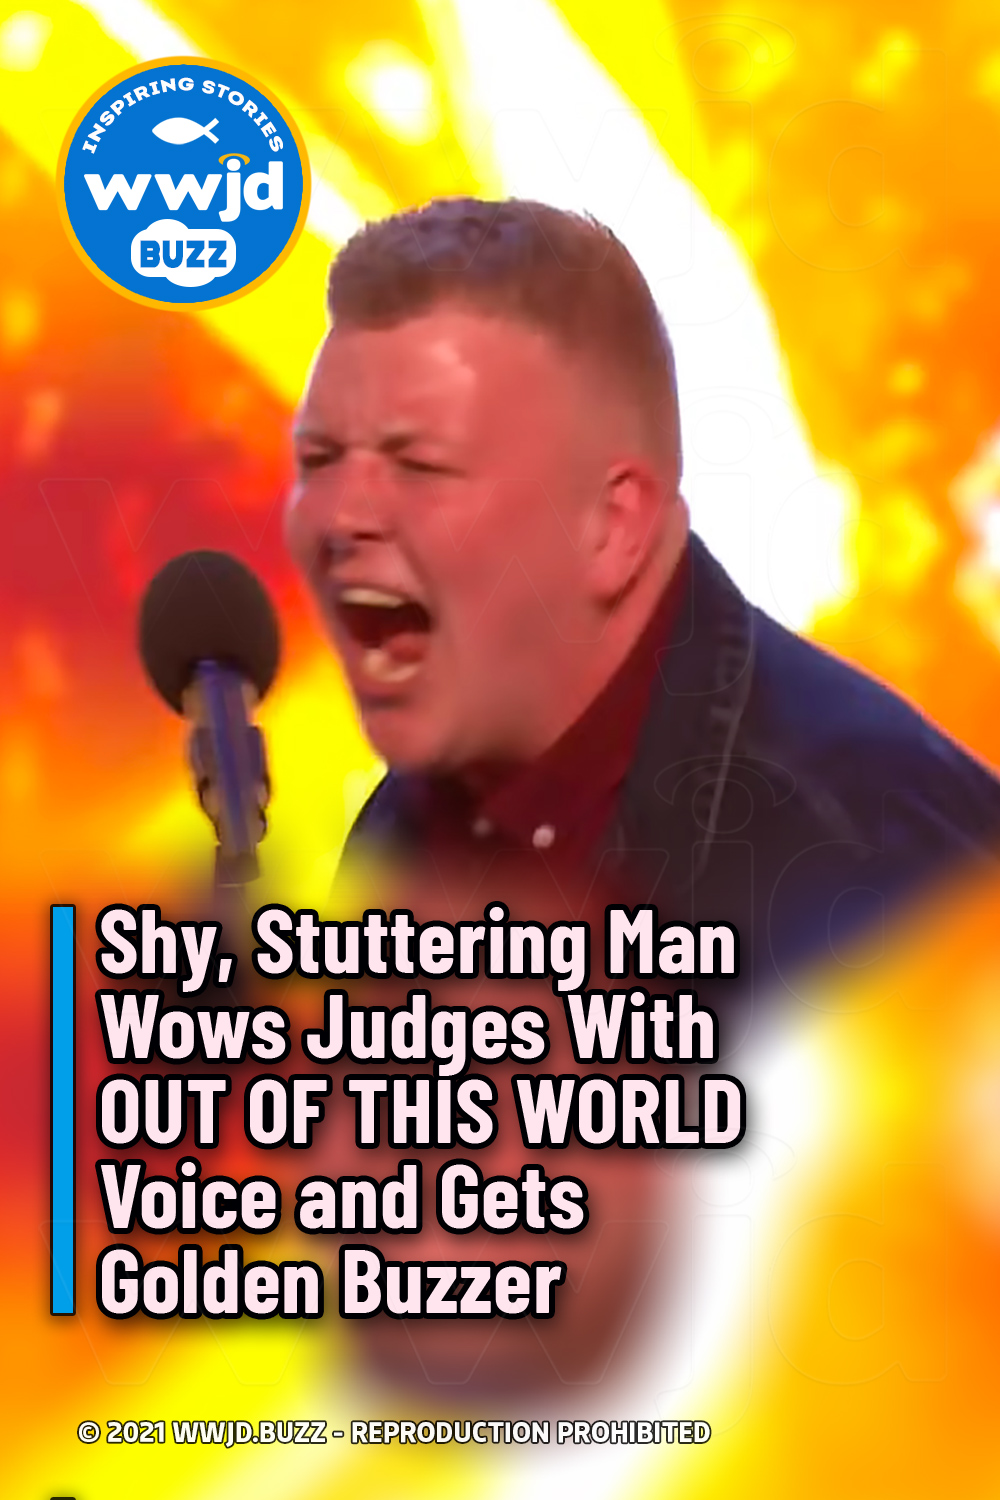 Shy, Stuttering Man Wows Judges With OUT OF THIS WORLD Voice and Gets Golden Buzzer